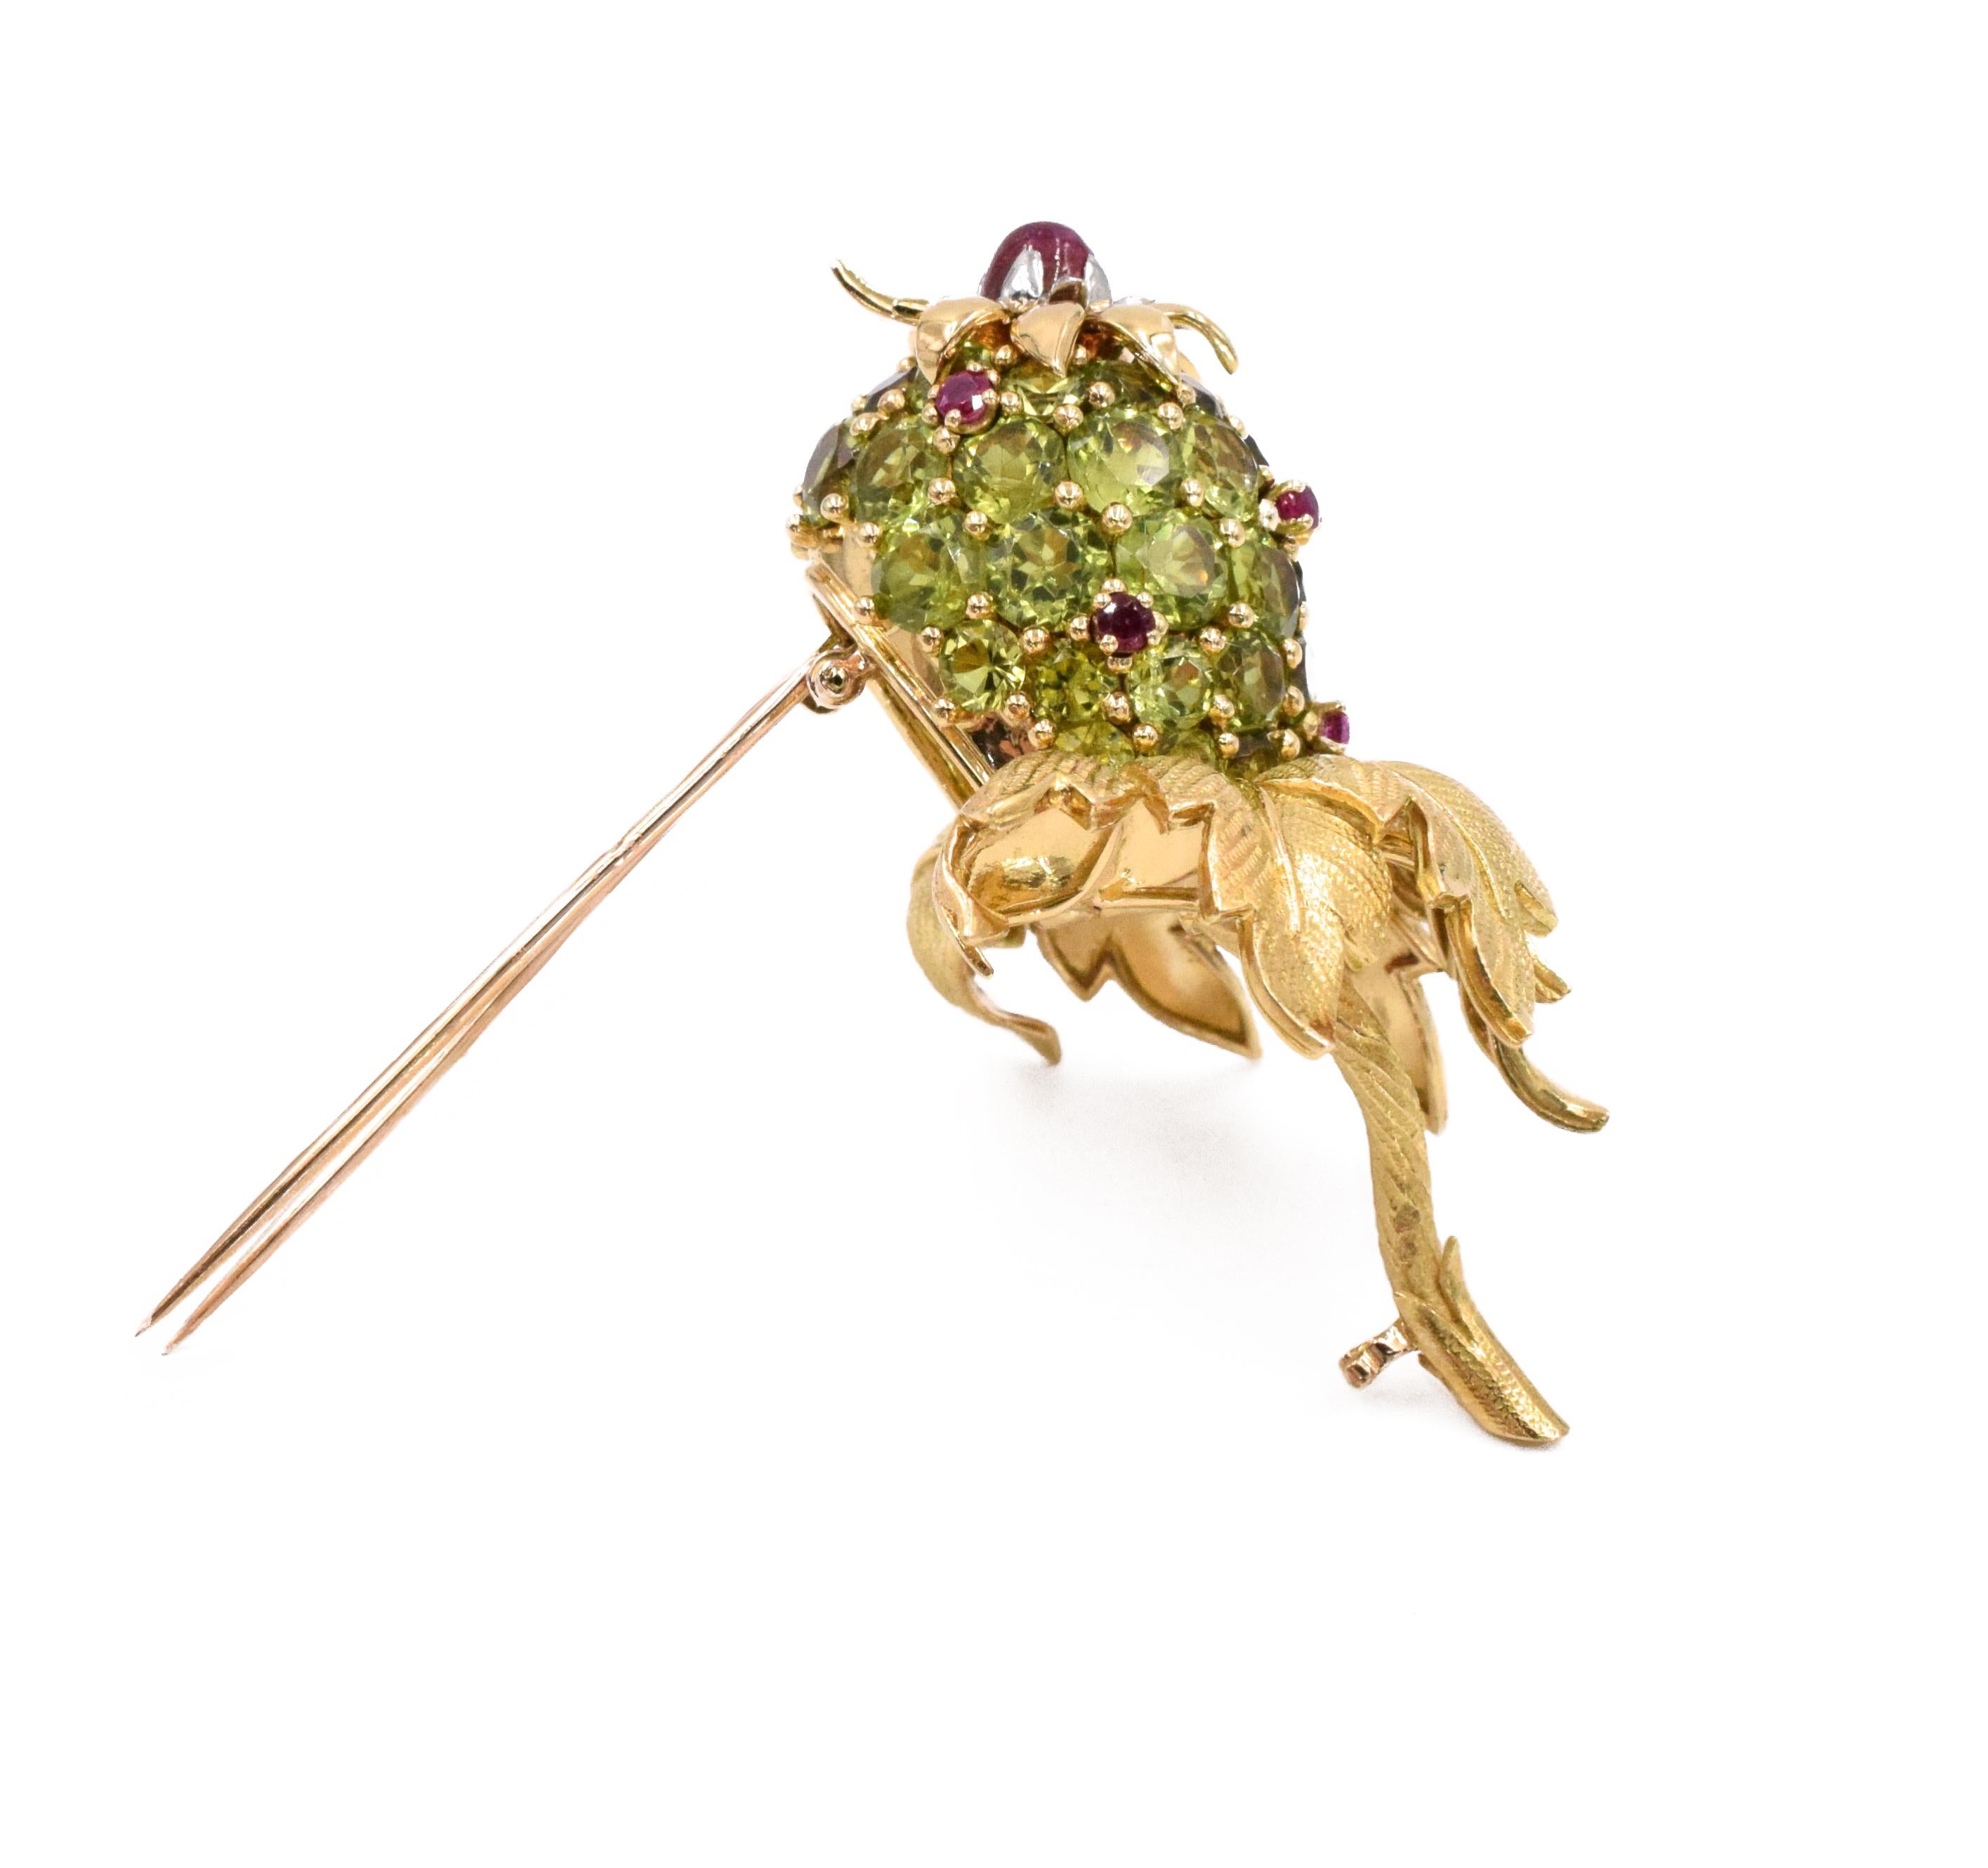 J. Schlumberger  'Pineapple' Peridot, Ruby, and 18k Yellow Gold Pin. This pin has round peridots (approximately 20- 22ct) and cabochon and round rubies (approximately 0.7- 08ct) all set in 18k yellow gold. Signed Schlumberger Paris, makers mark, and